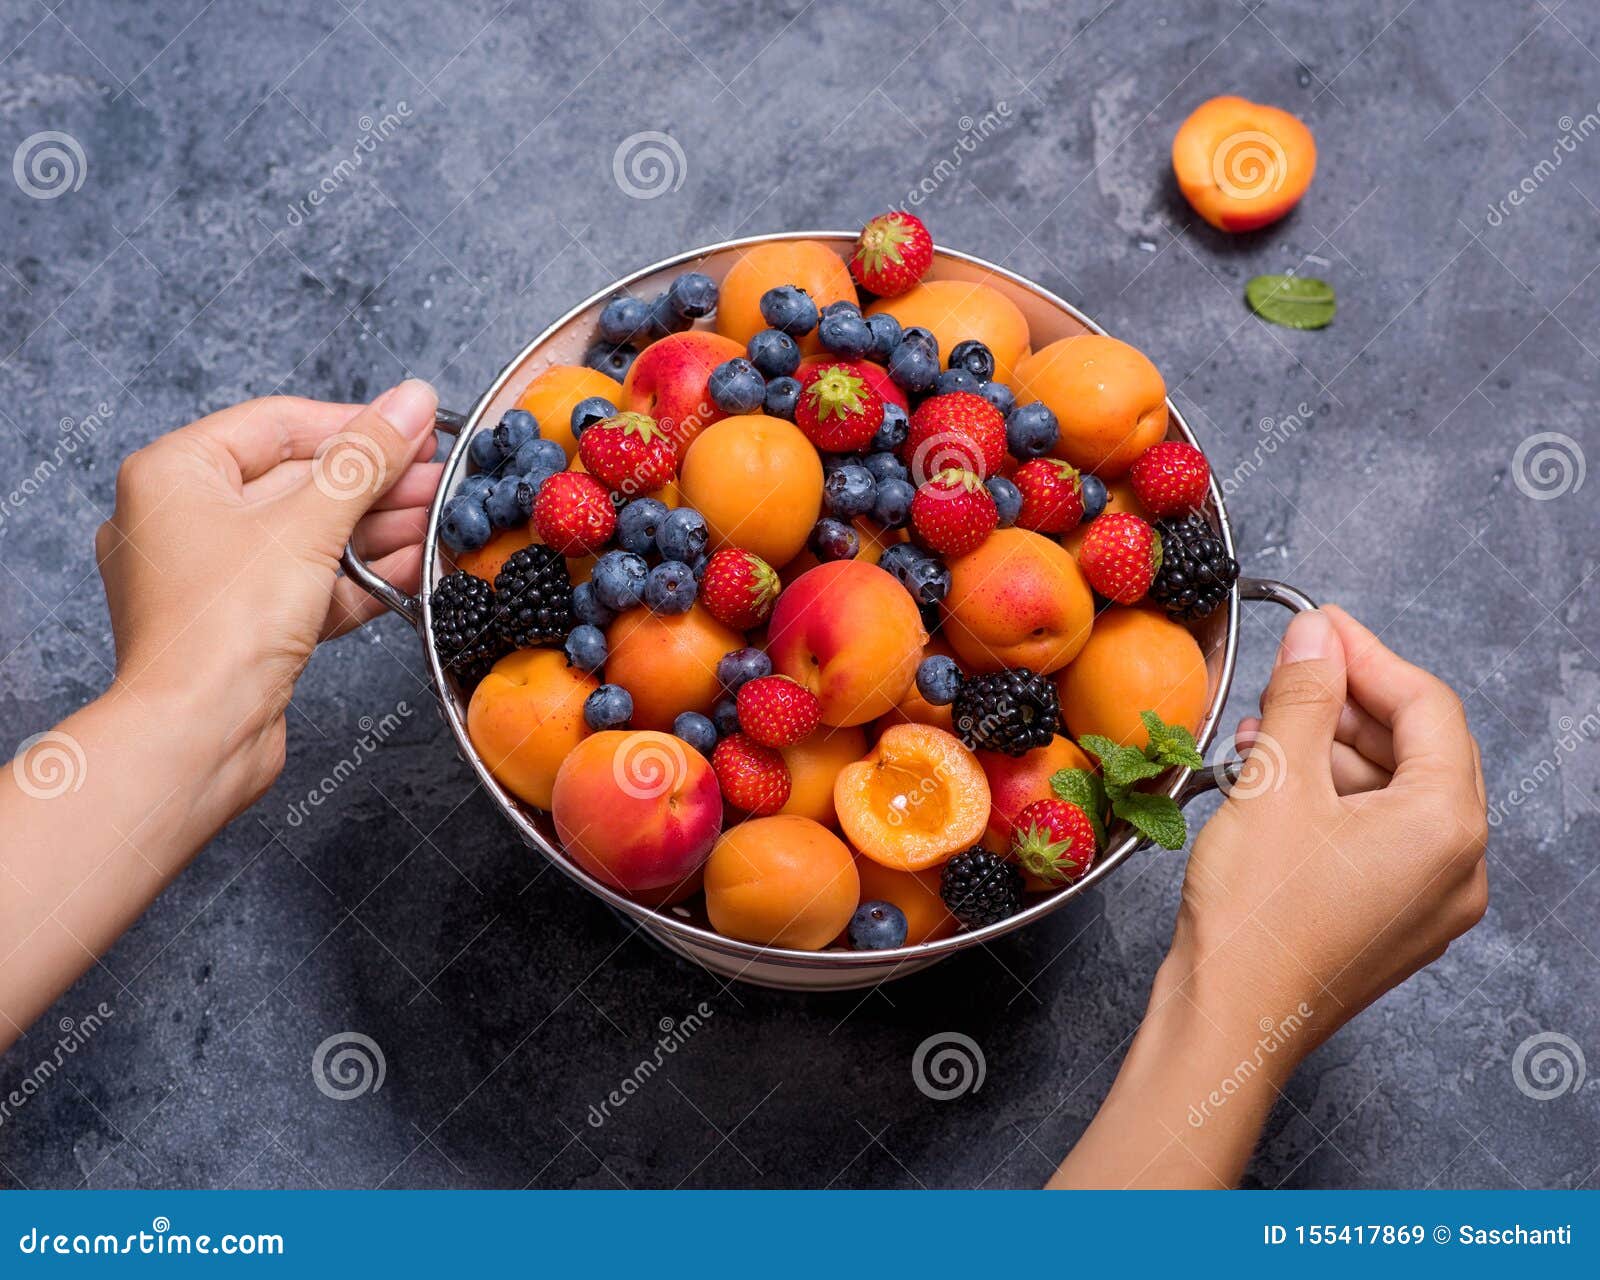 fresh summer fruits and berries, apricots, blueberries, strawberries in colander, woman`s hands holding colander with fruits and